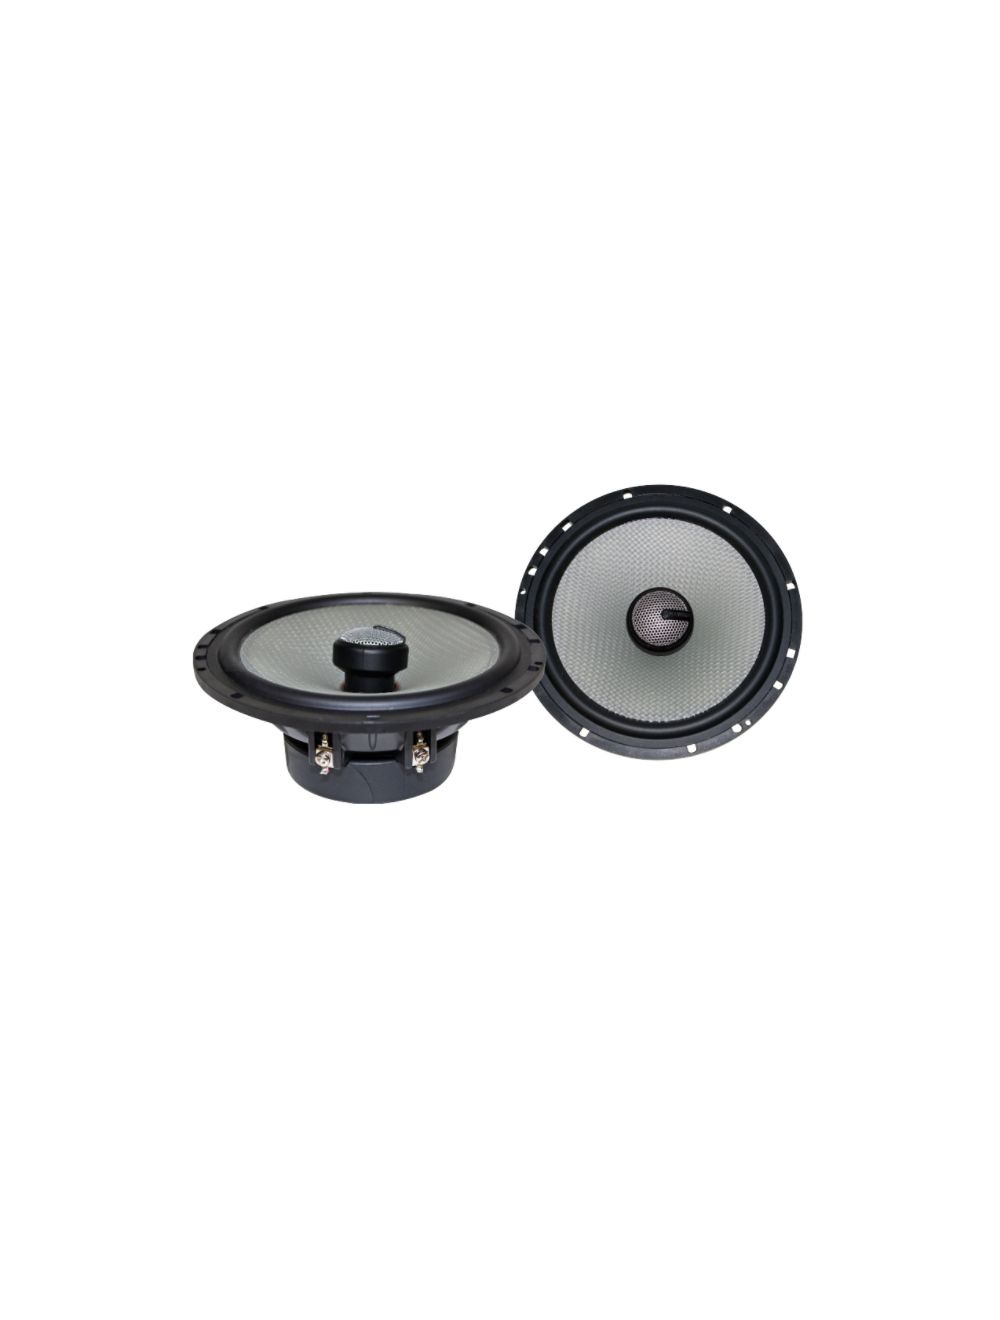 Car Speaker Size Replacement fits 2004-2012 for GMC Canyon Extended Cab (not amplified)